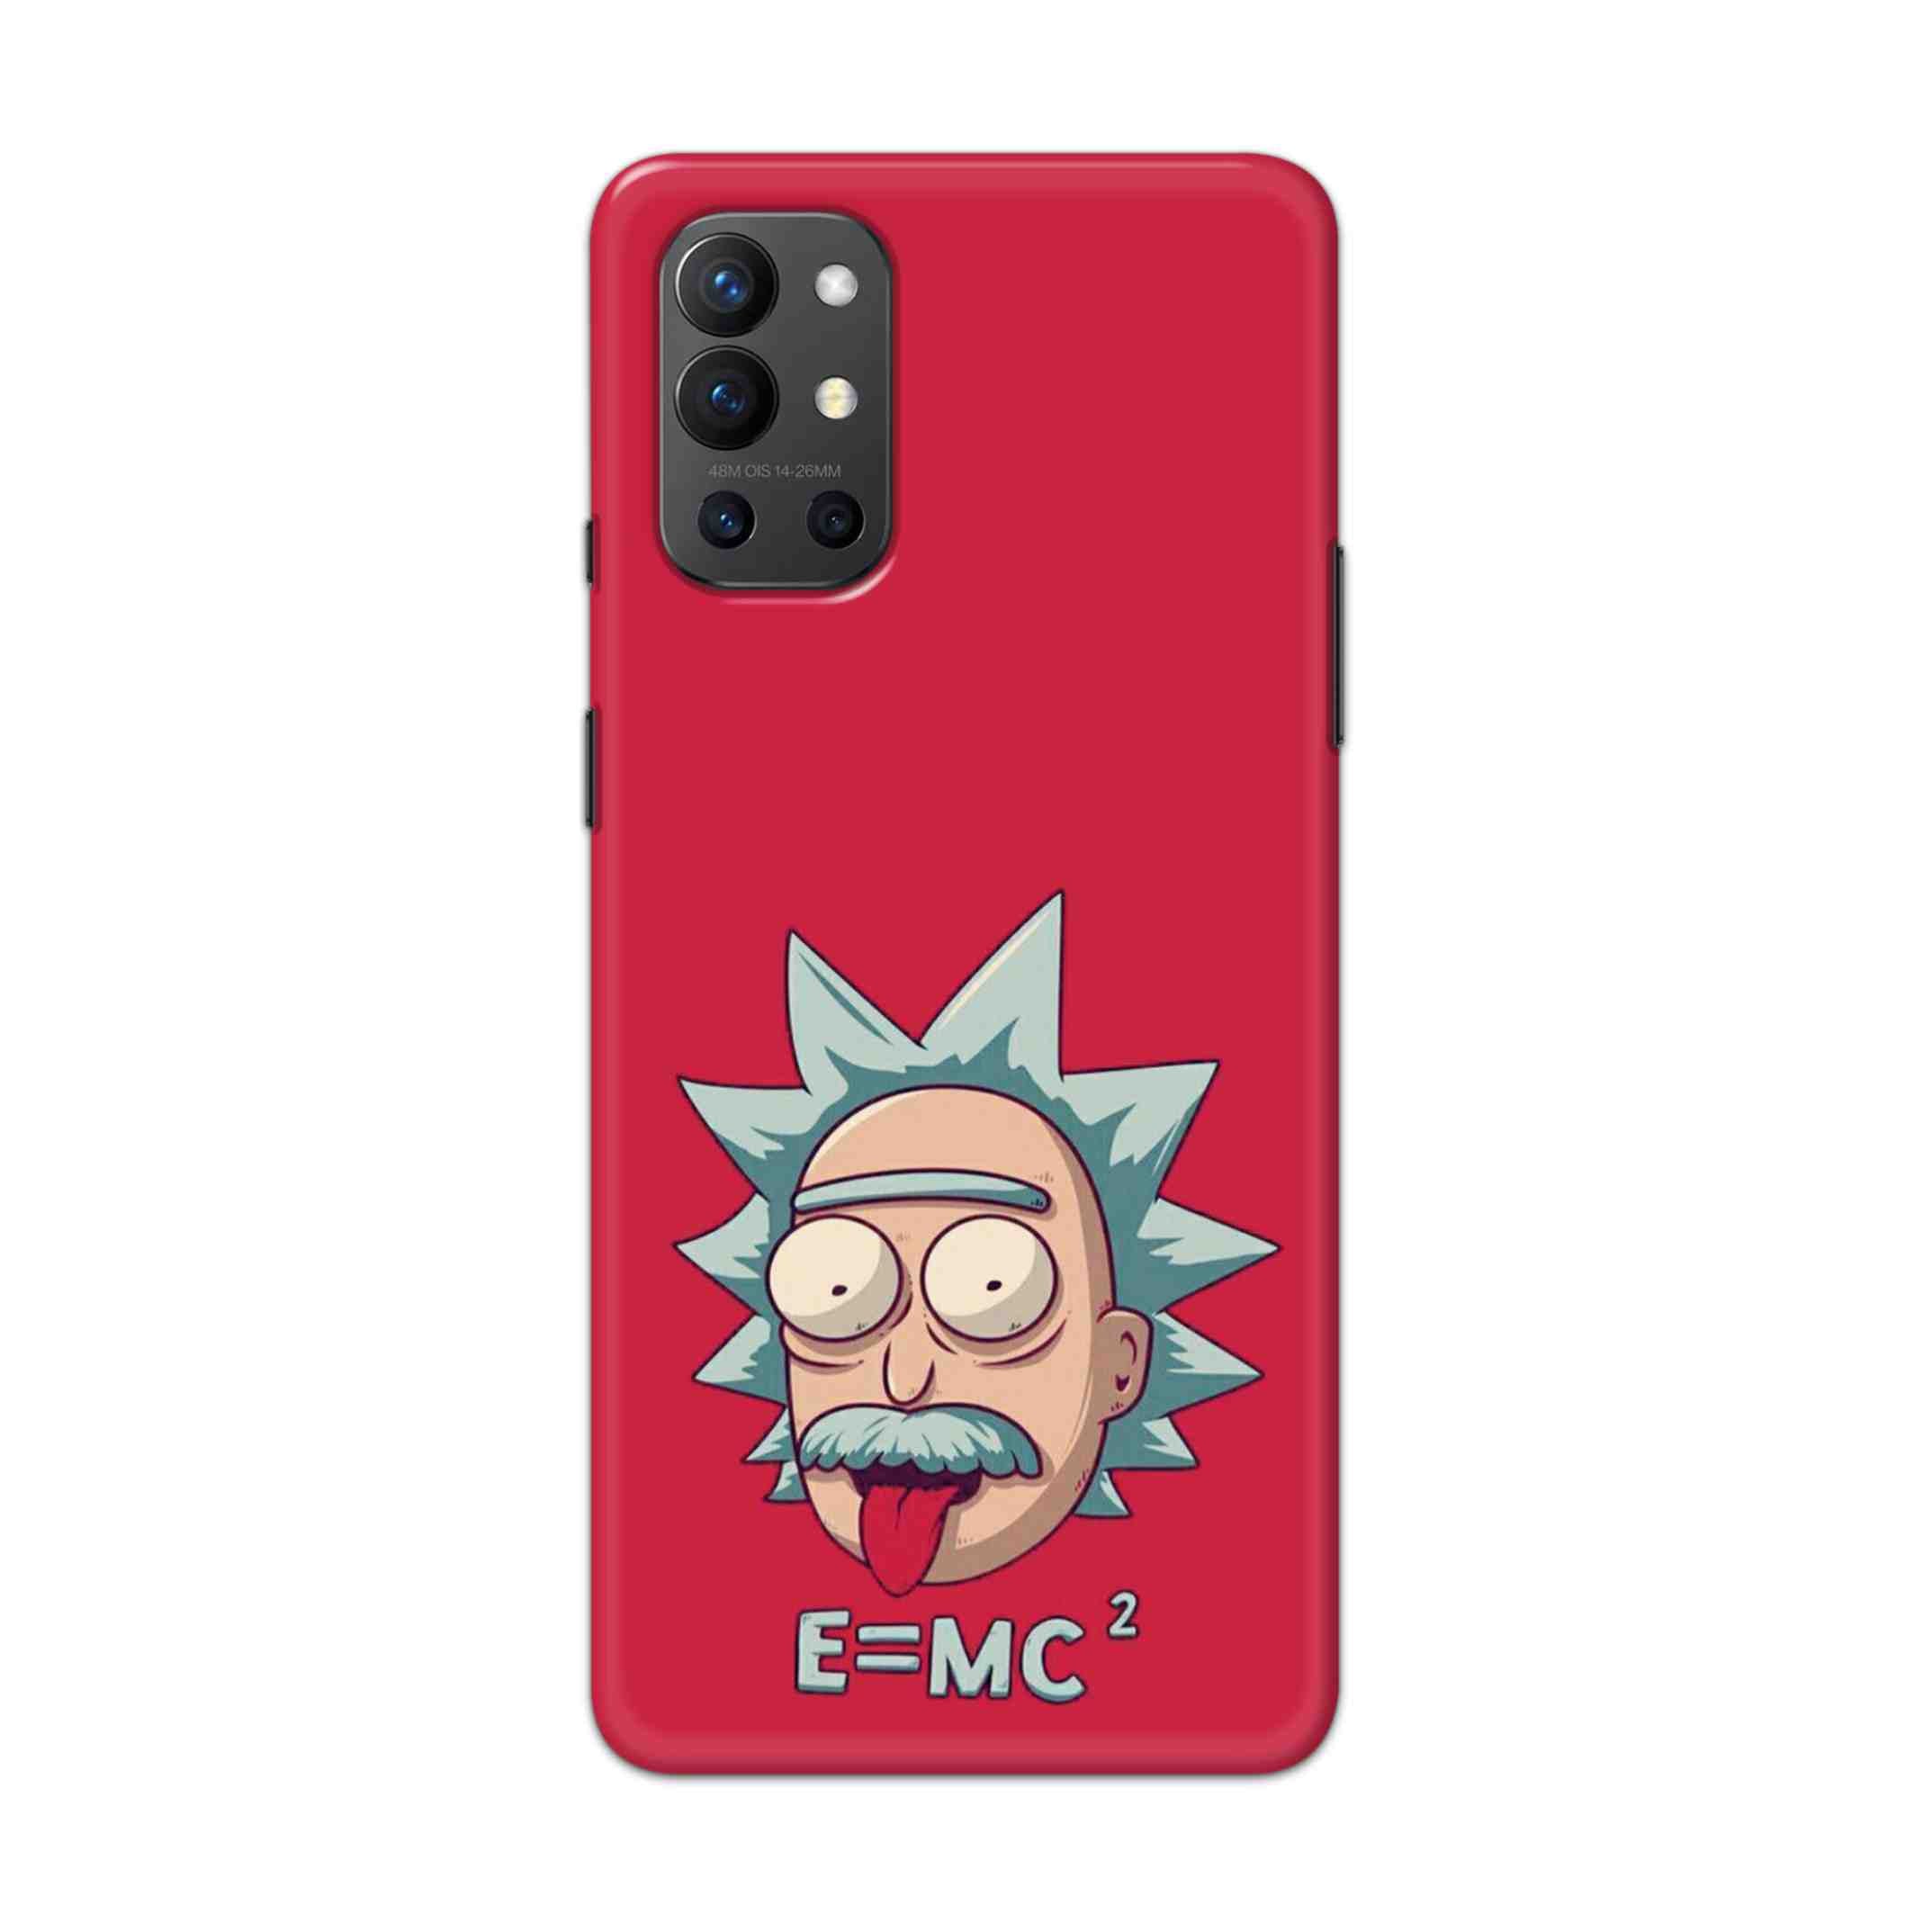 Buy E=Mc Hard Back Mobile Phone Case Cover For OnePlus 9R / 8T Online